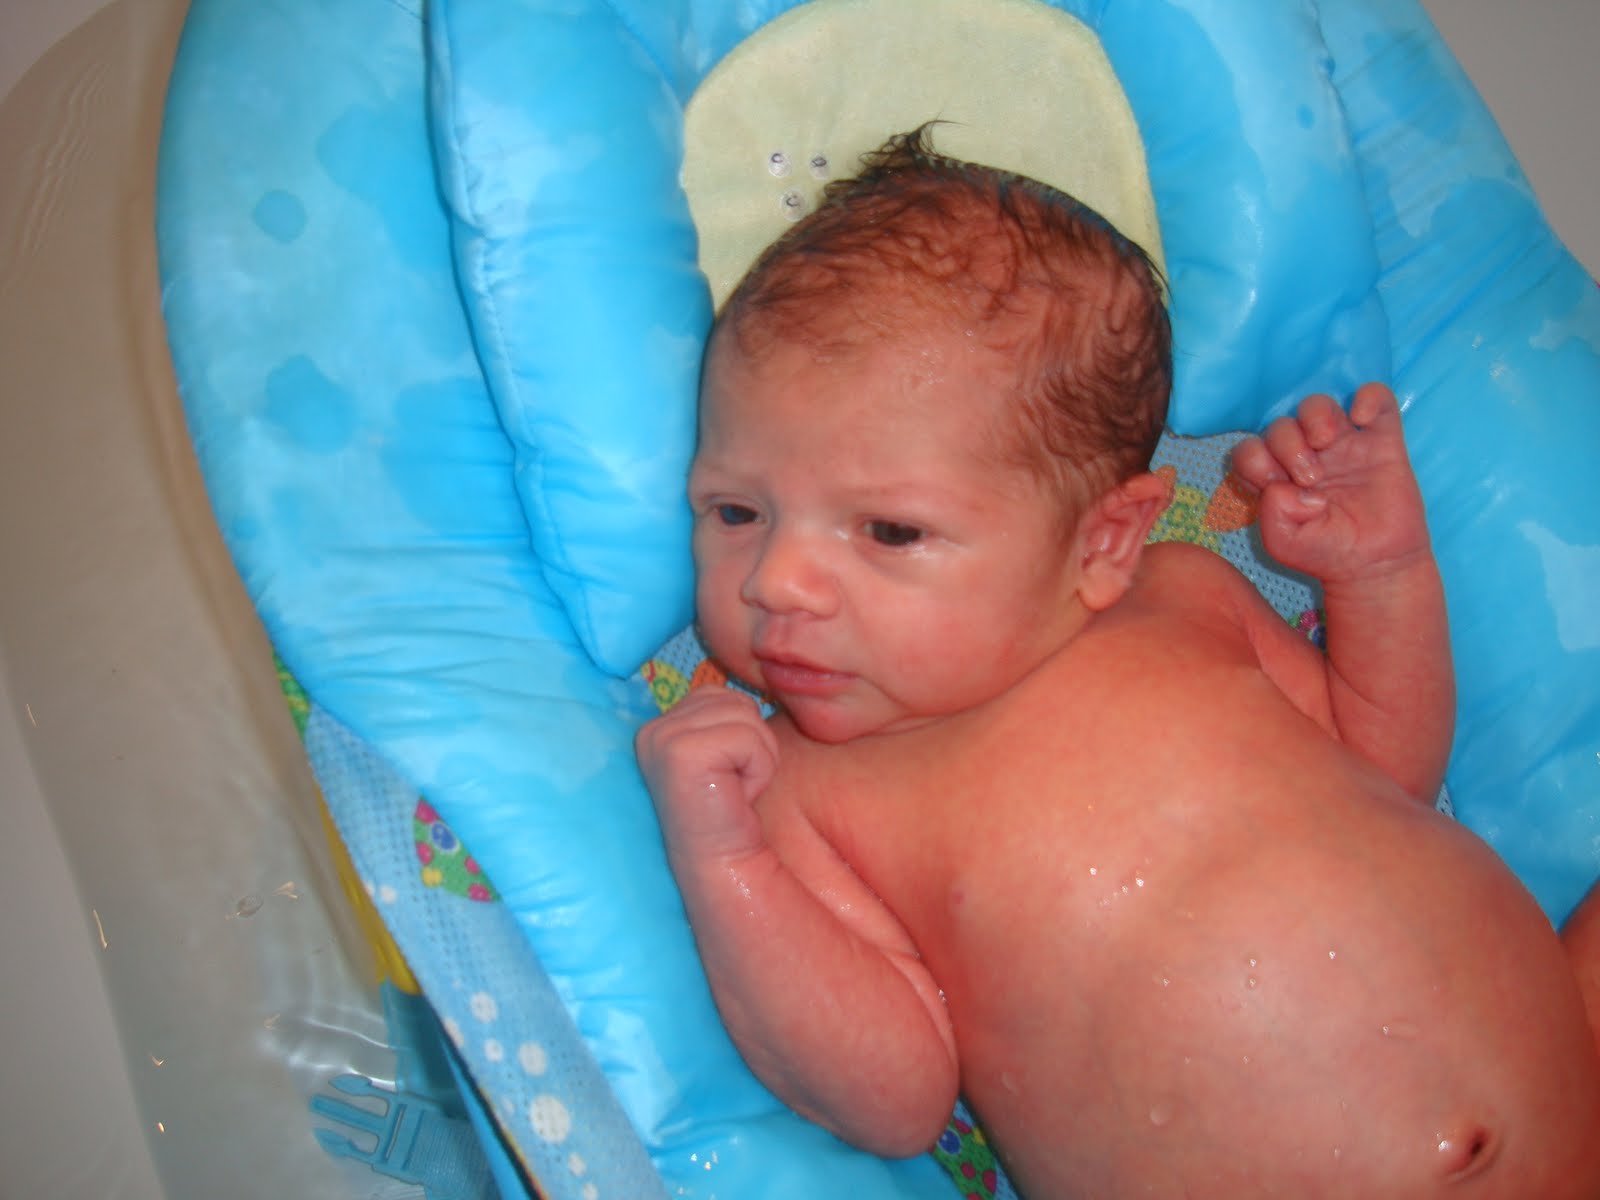 Tales of Wonder: Lessons Learned from Baby's First Bath